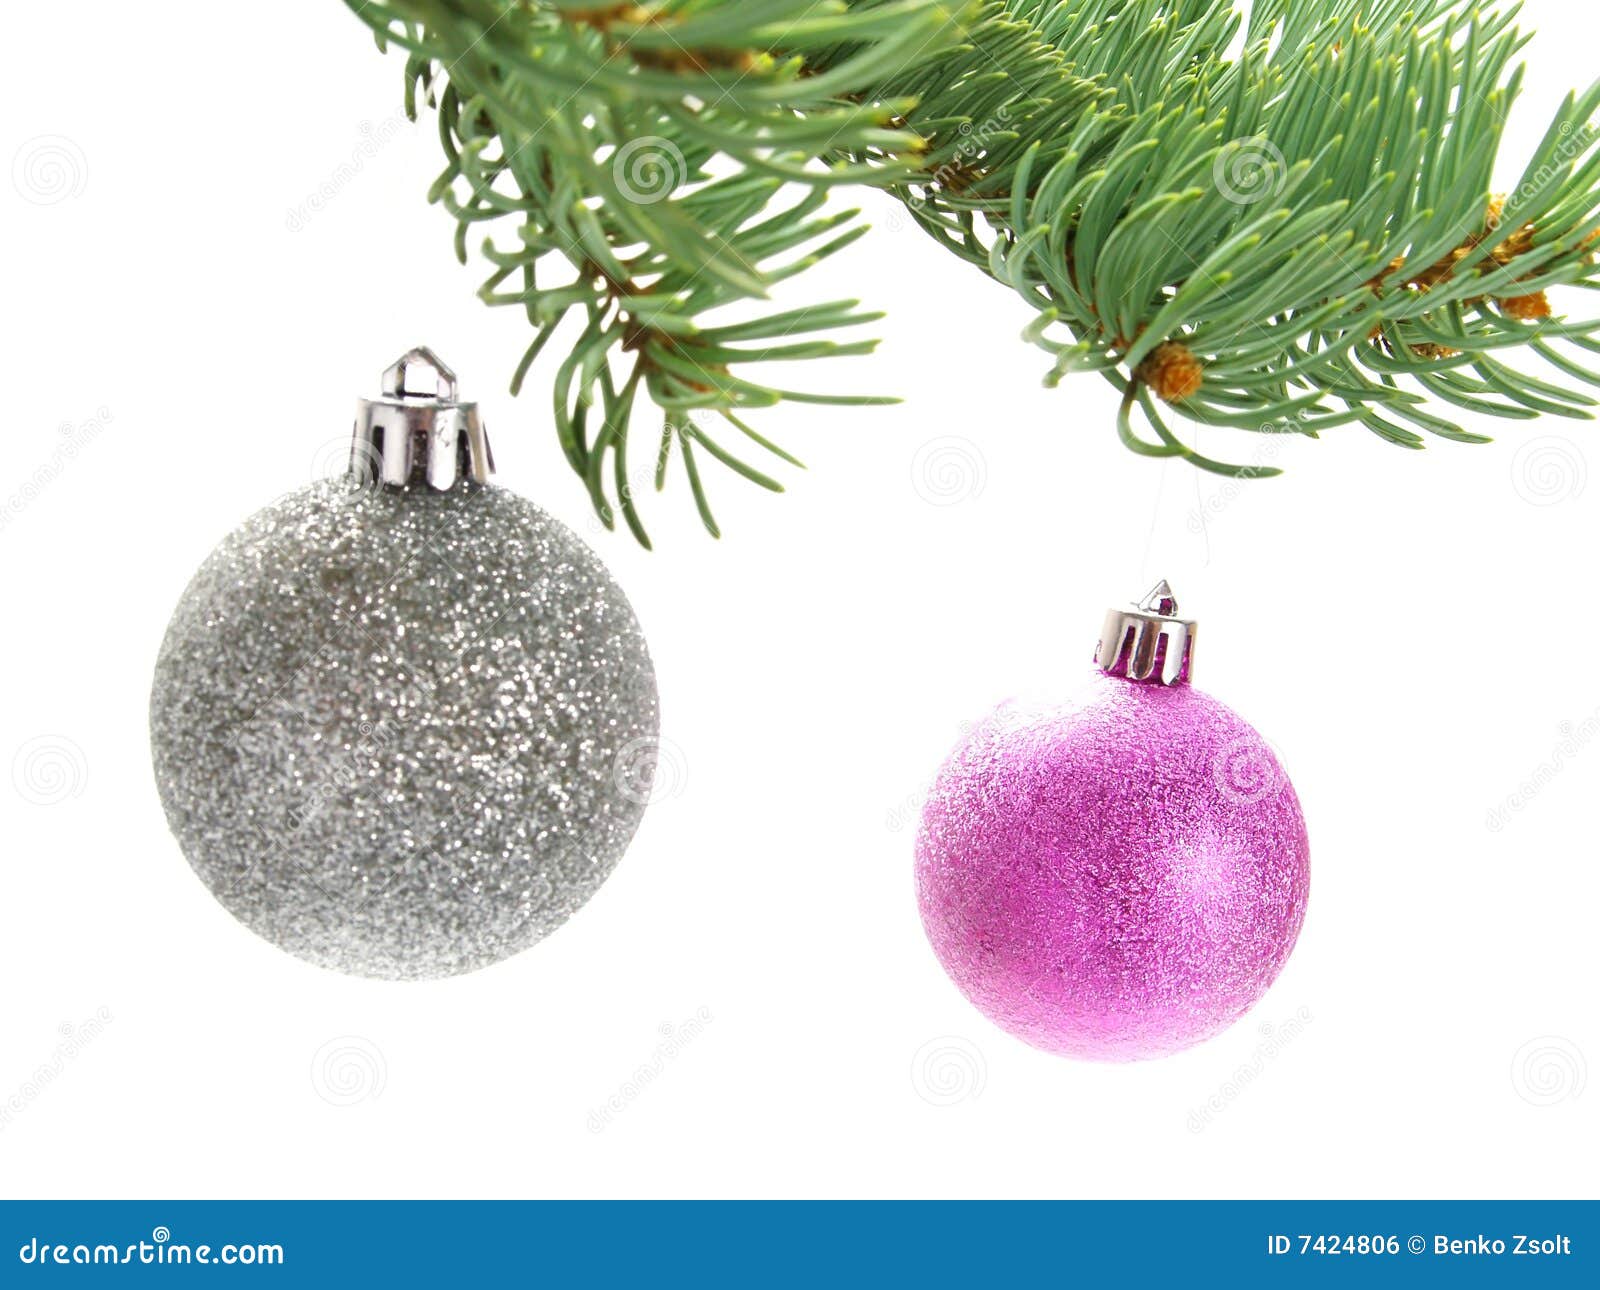 Closeup photo of some nice colorful silver pink Christmas decoration baubles hanging on Christmas tree Isolated on white